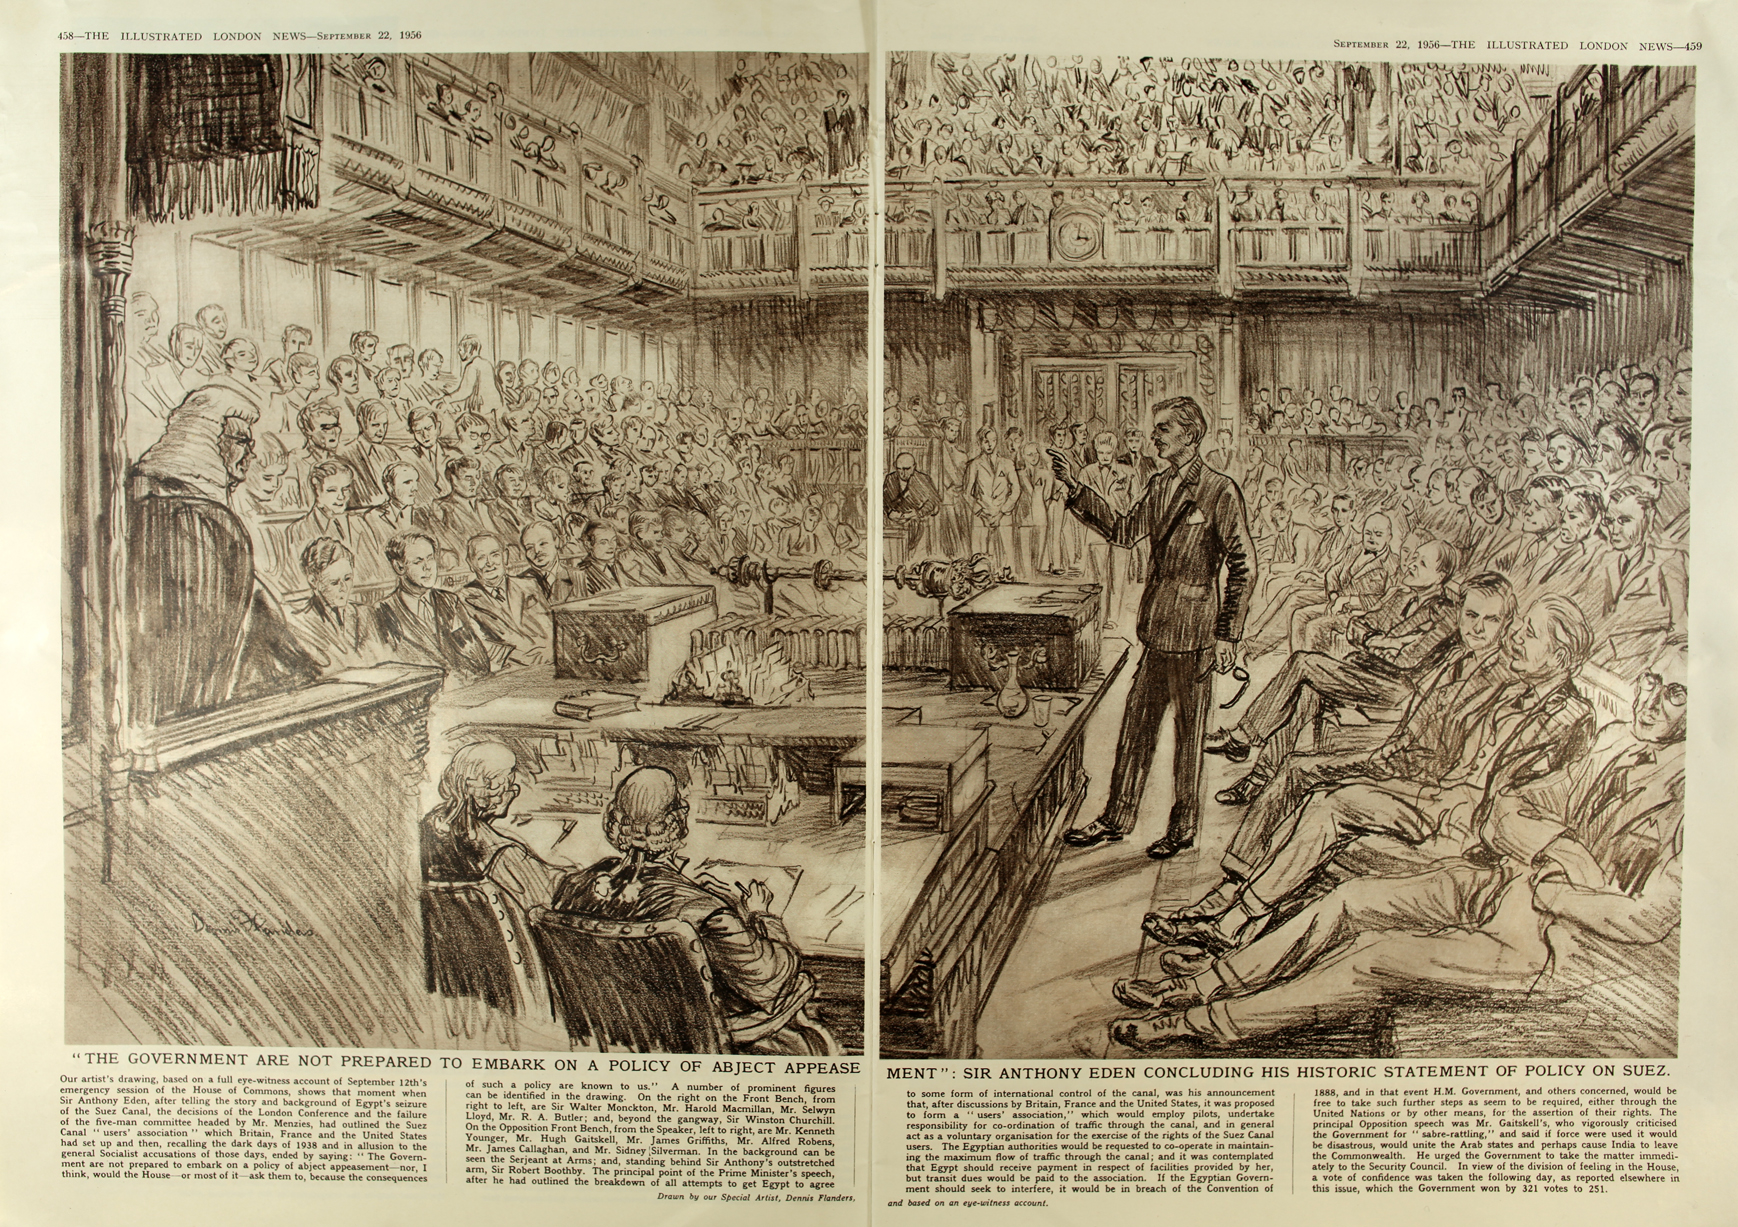 Newspaper article with large illustration of a man in a suit standing up and speaking to a seated crowd in the Commons Chamber.